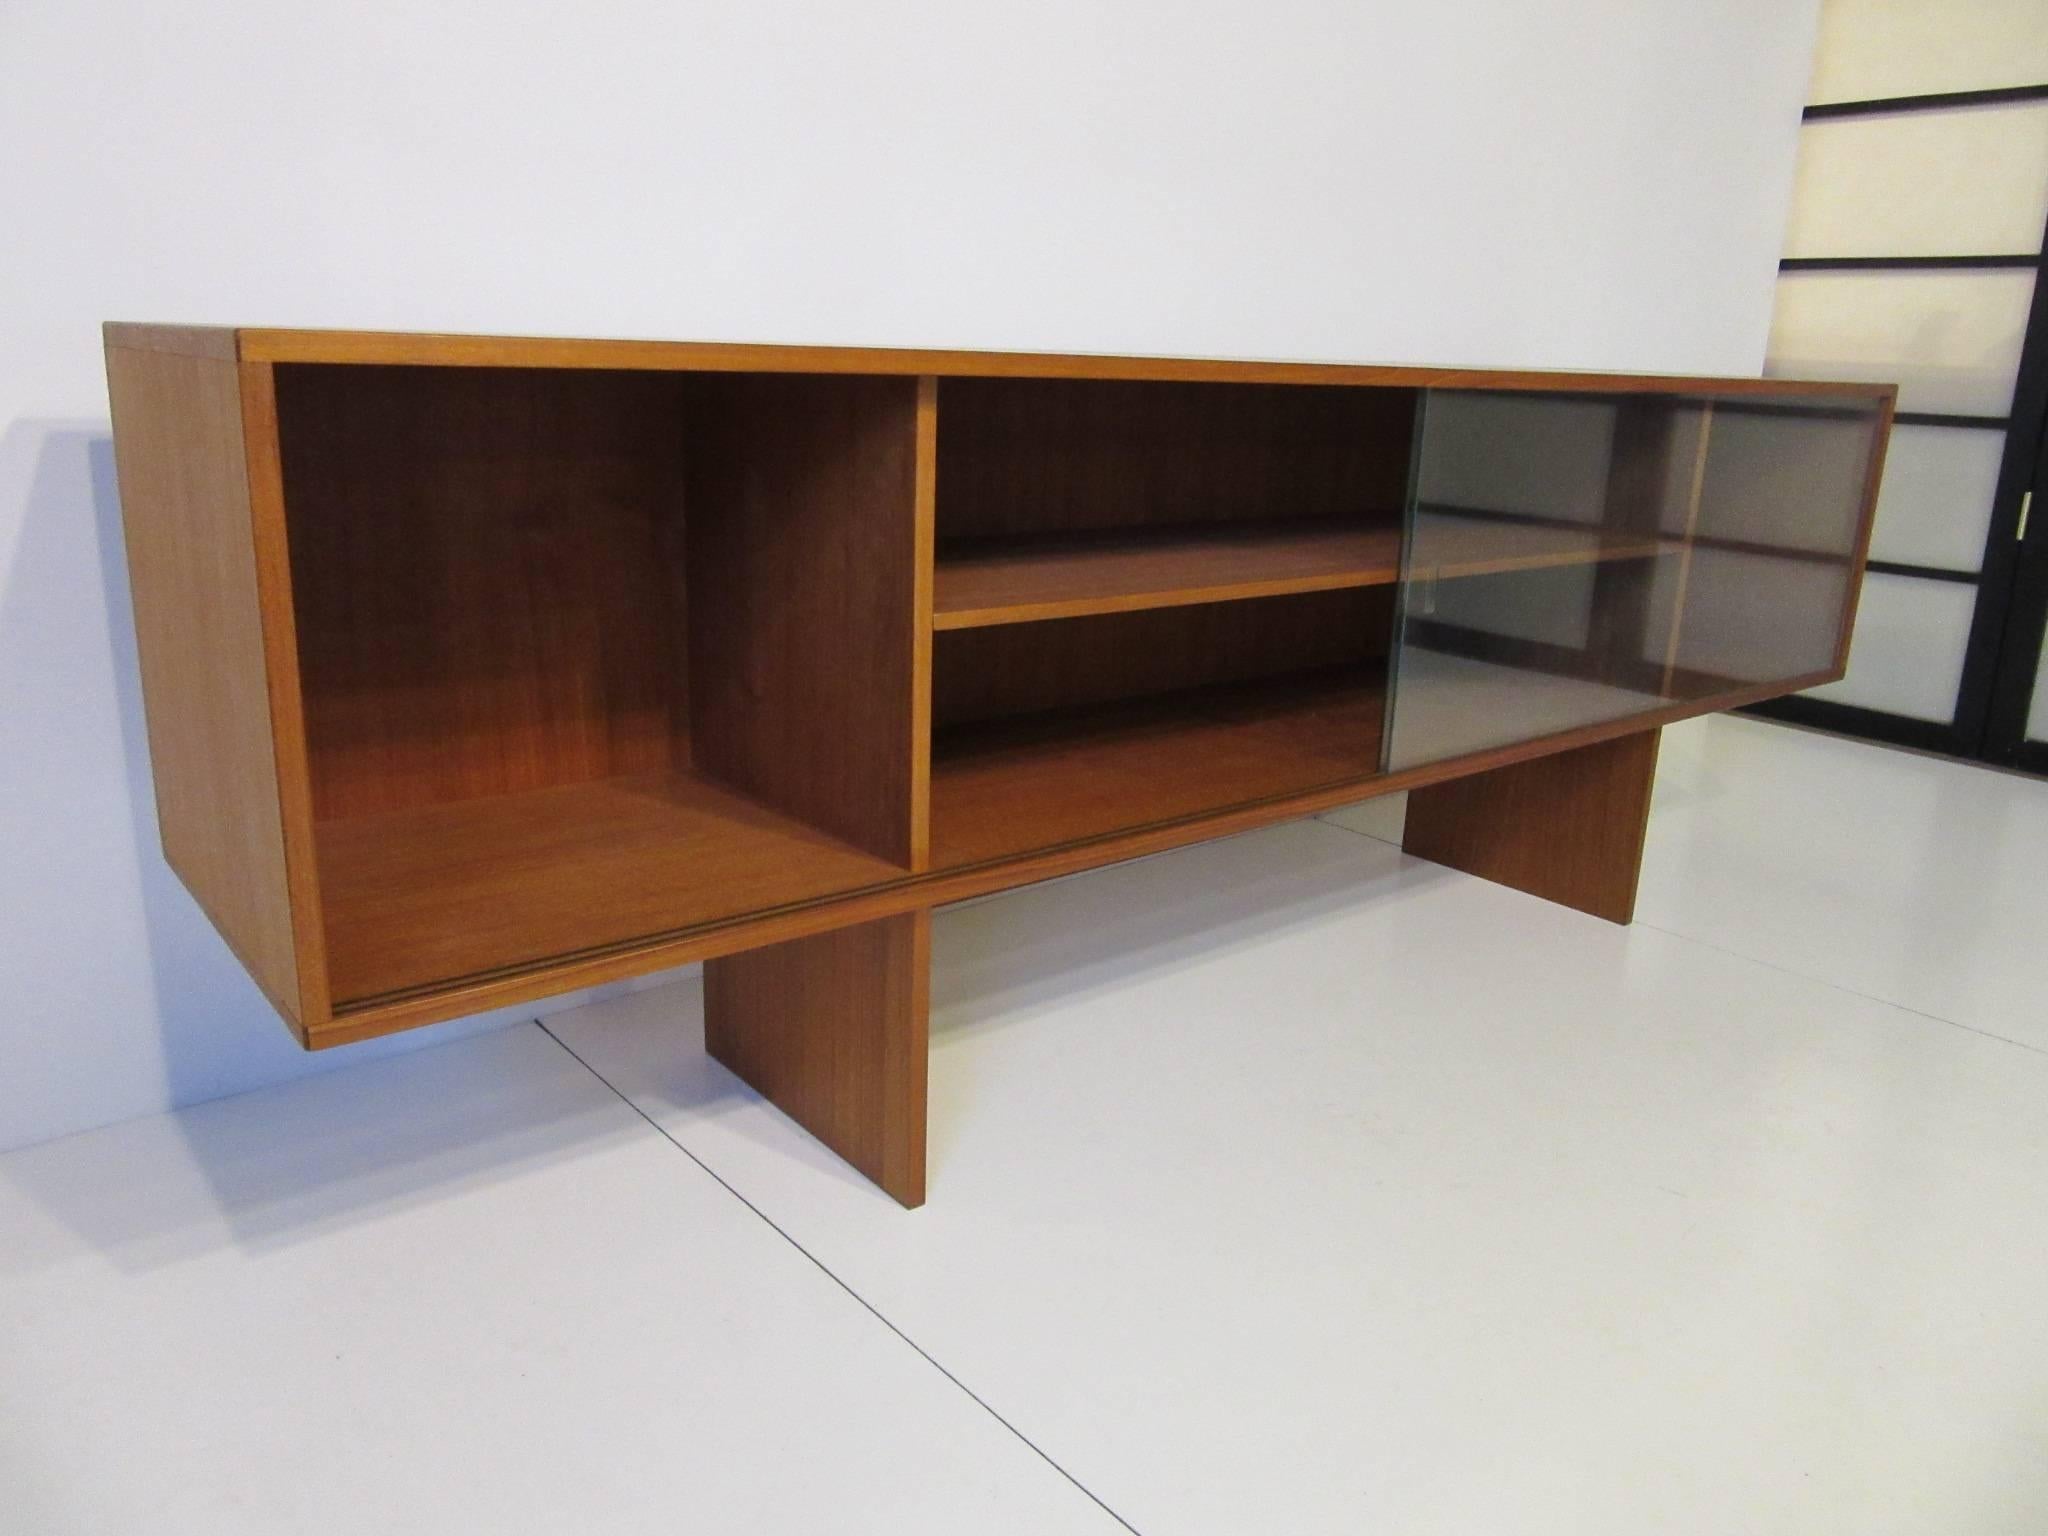 A teak wood bookcase with sliding glass doors by Jens Quistgaard for Lovig, a sleek and low profile design which retains the manufactures label Danish Design Lovig made in Denmark.